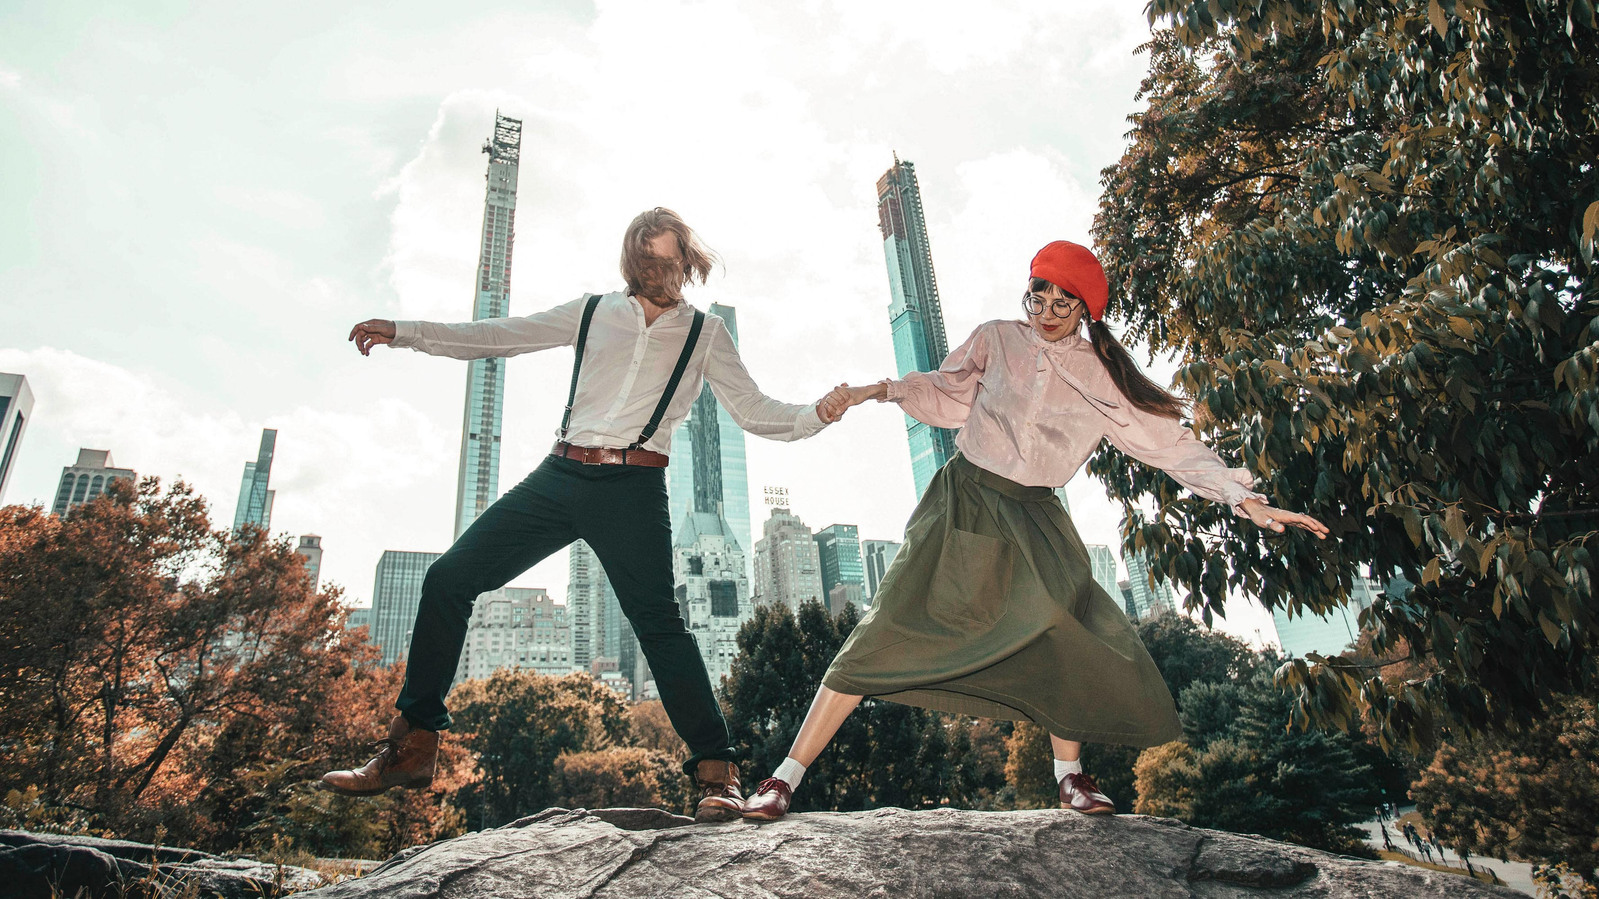 Stylish couple posing silly in Central Park in NYC. Engagement photographer Ivan Djikaev/Mind On Photography.